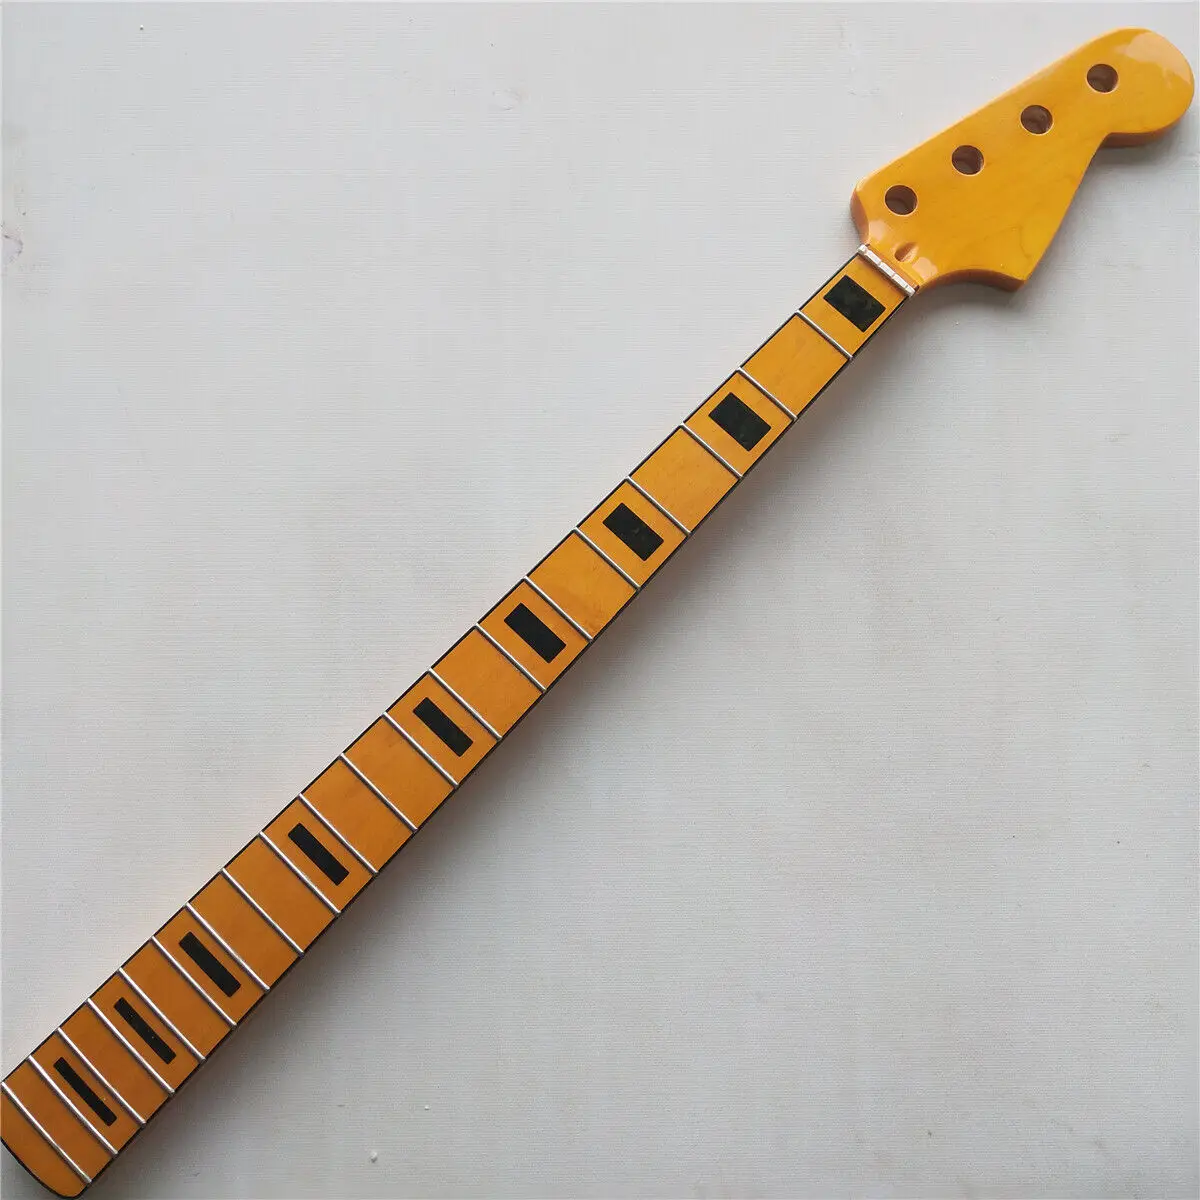 34inch J Bass Guitar Neck Maple 4 string 20 Fret Maple fingerboard inlay Yellow for DIY New Replacement 1 set enlarge